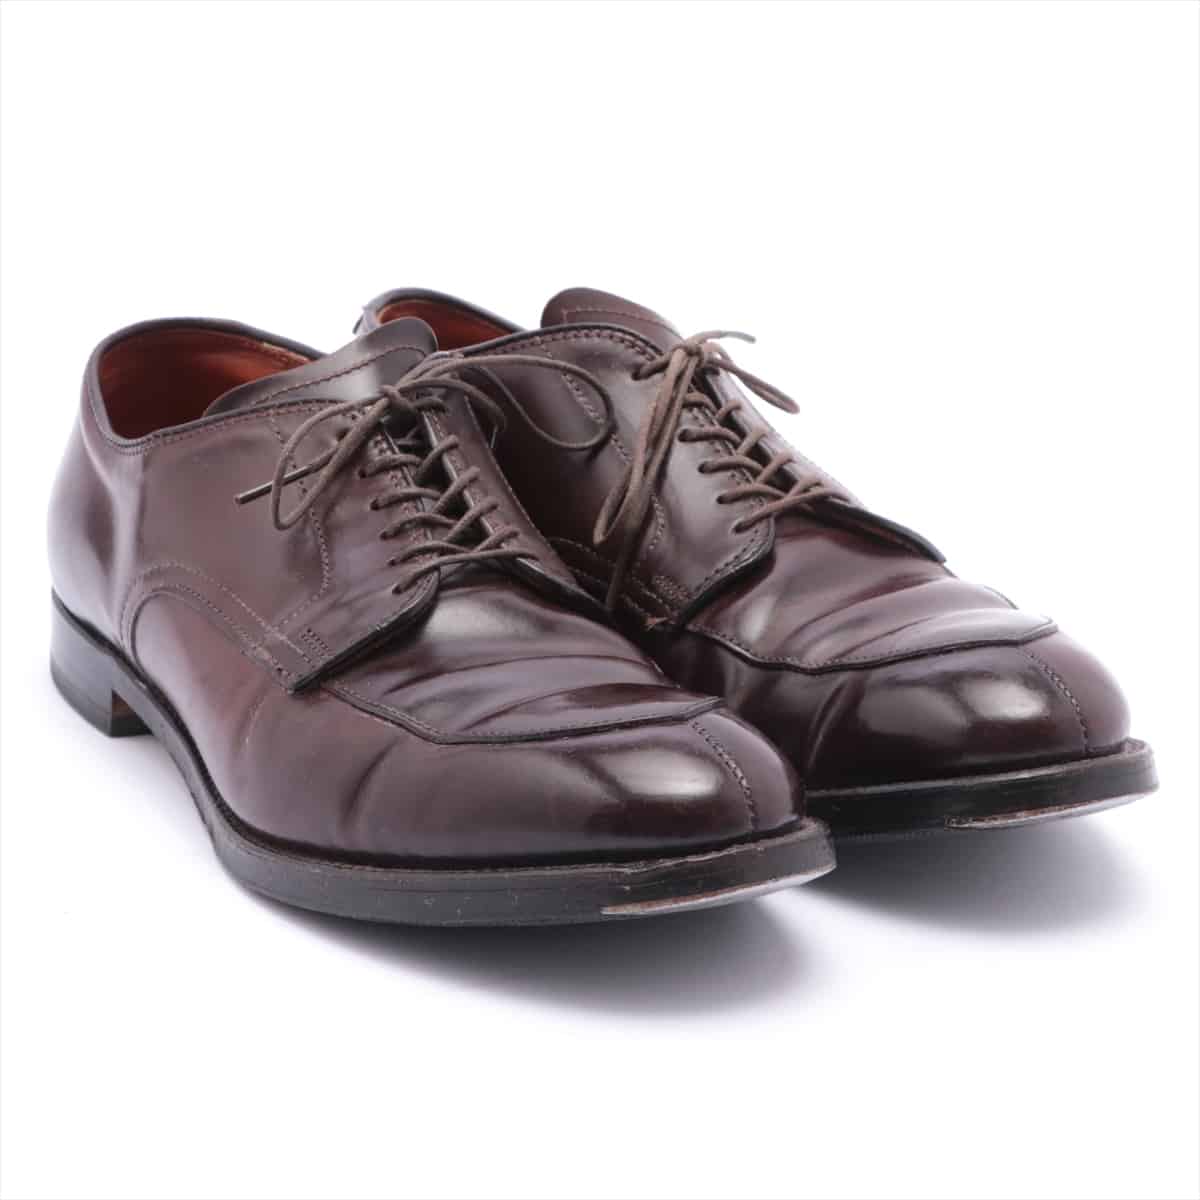 Alden Leather Leather shoes 8 1/2 Men's Brown Cordovan Resoled